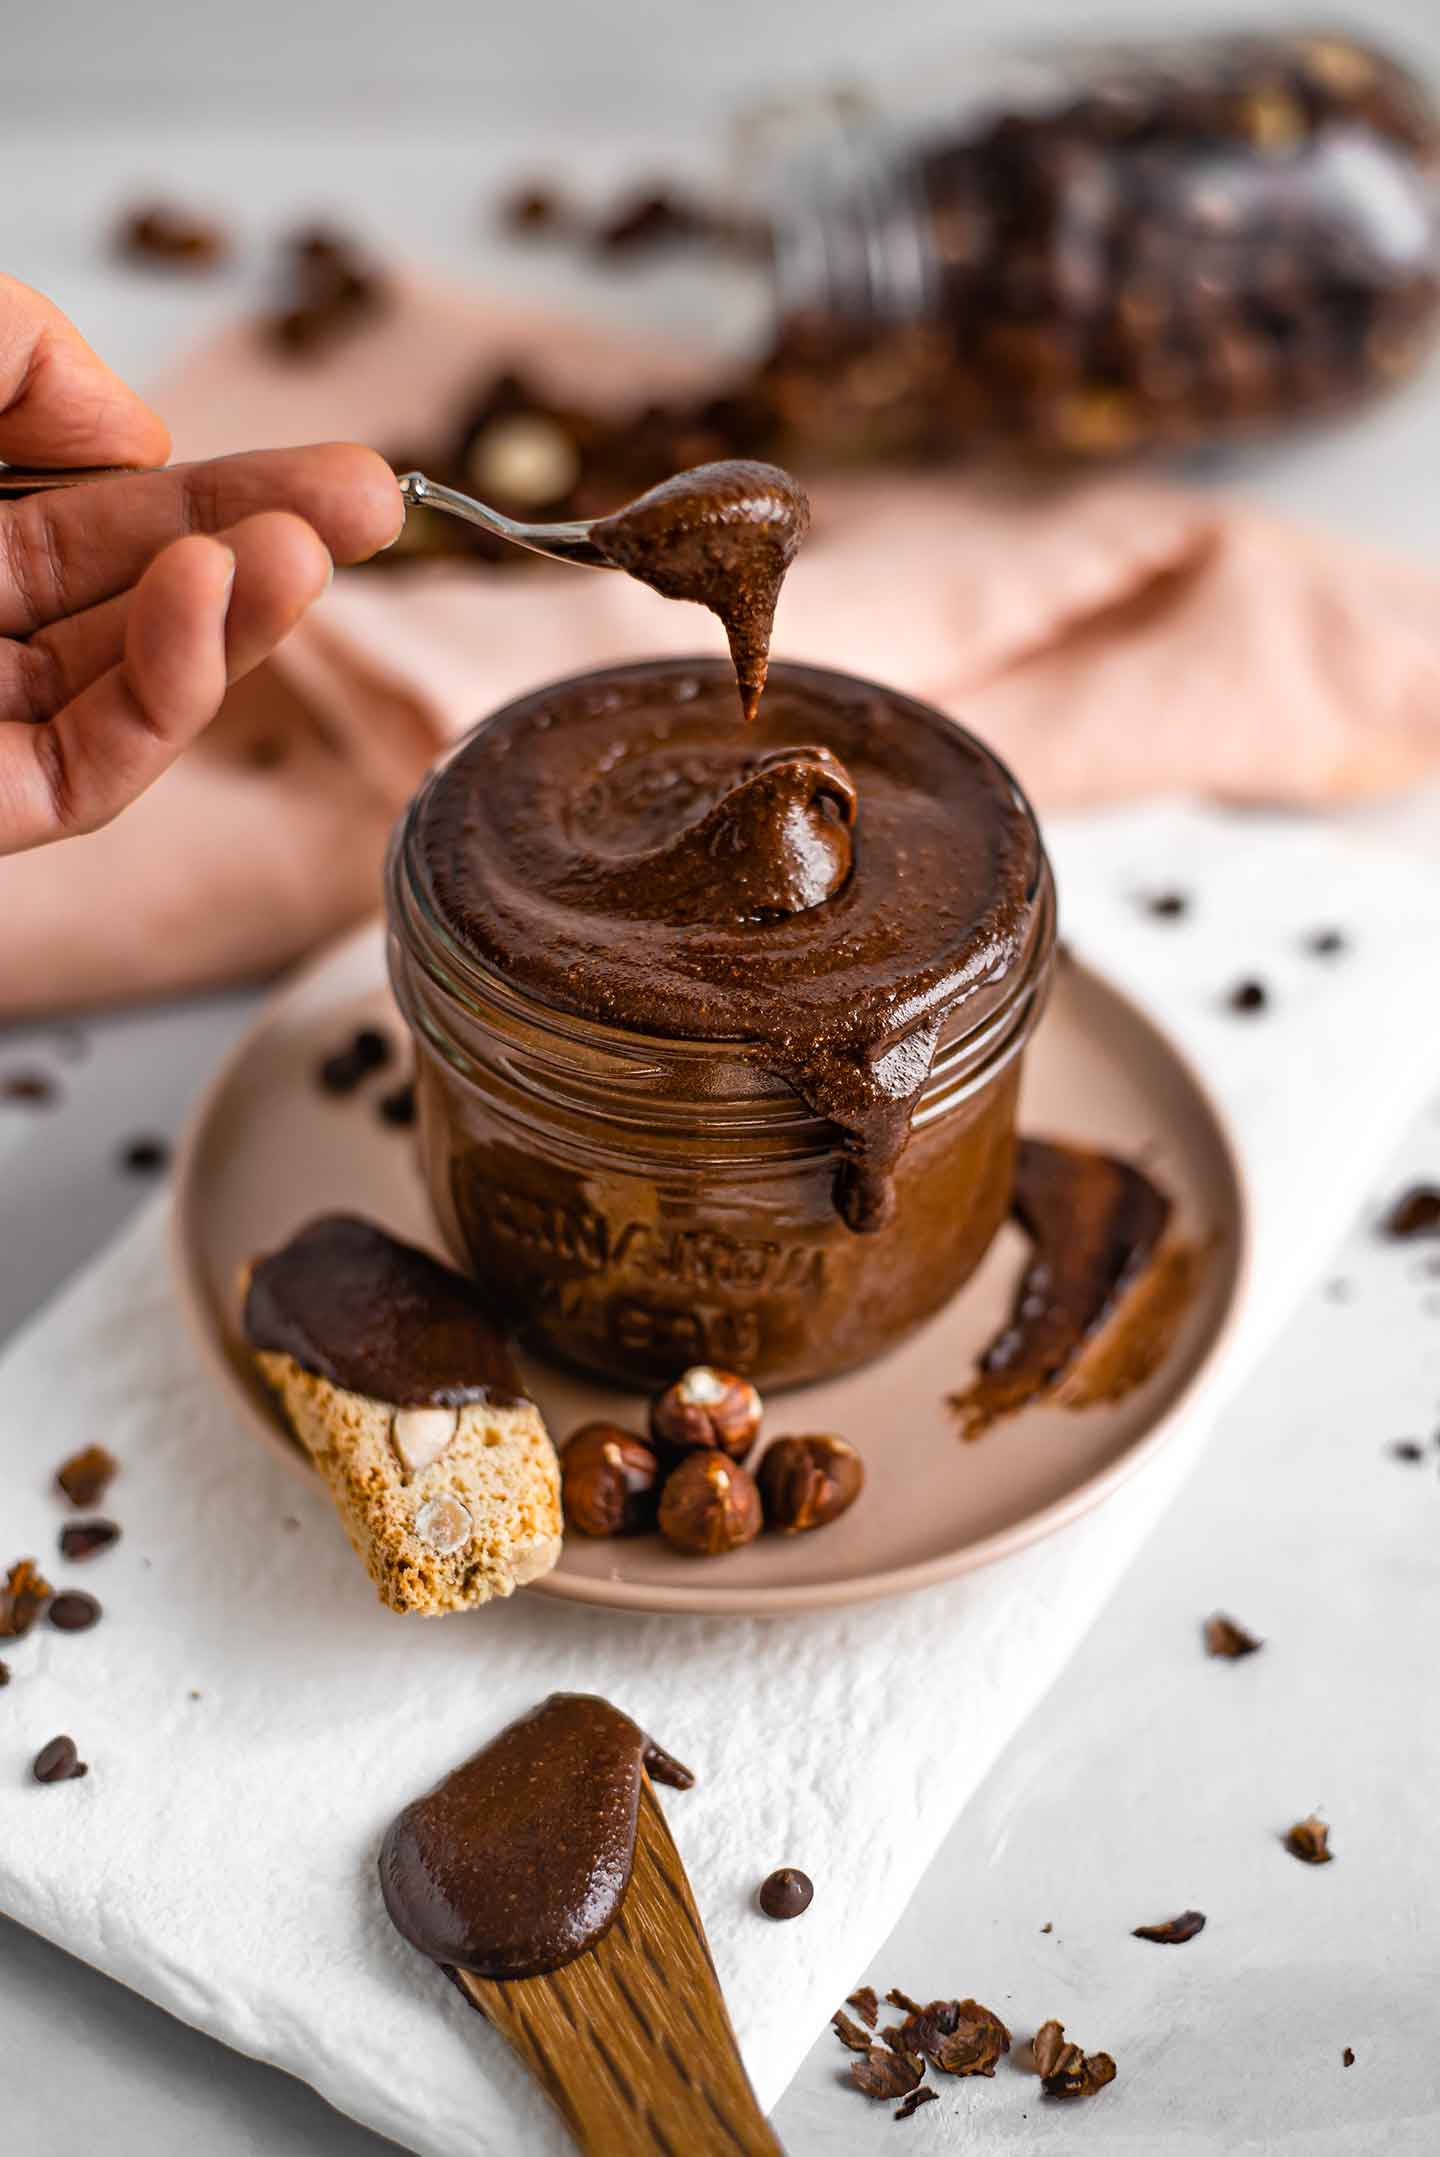 Side view of a hand using a spoon to scoop thick and creamy dark chocolate hazelnut spread out of a glass jar.